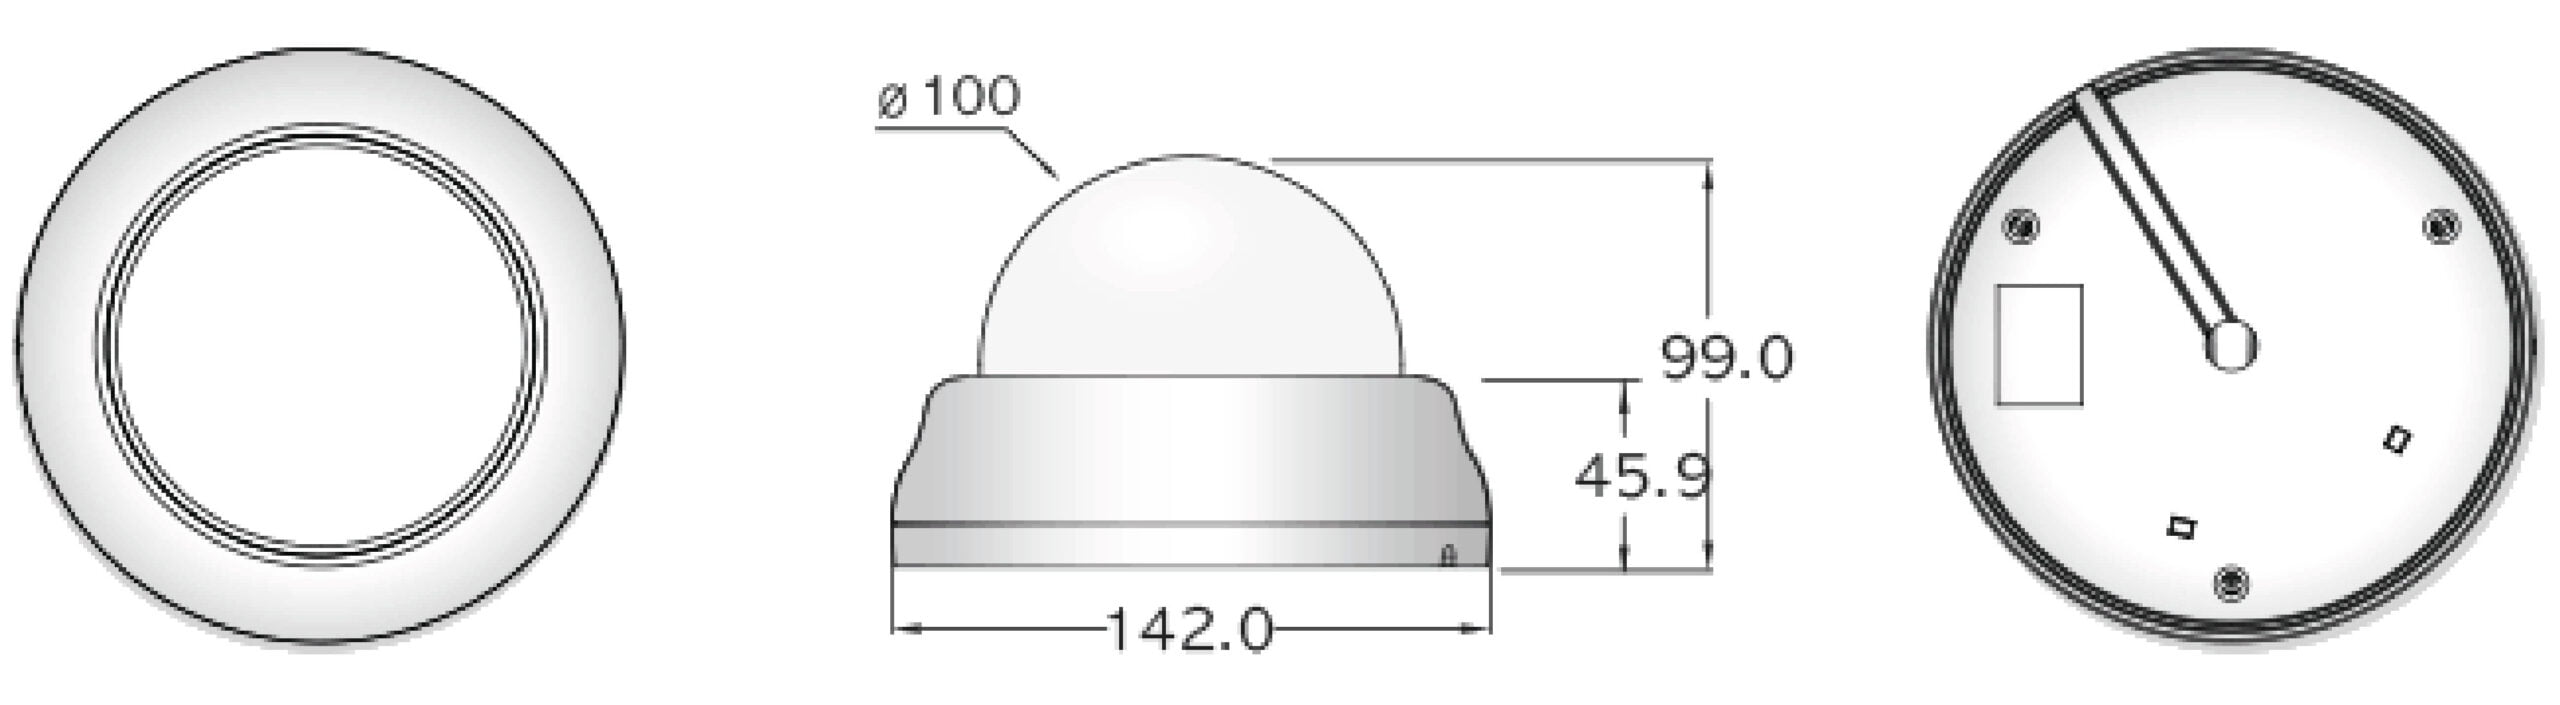 Eyemax UDL-204 V EX-SDI : 1080p Non-IR Indoor Large Dome with Varifocal Lens and Dual Power Dimensions